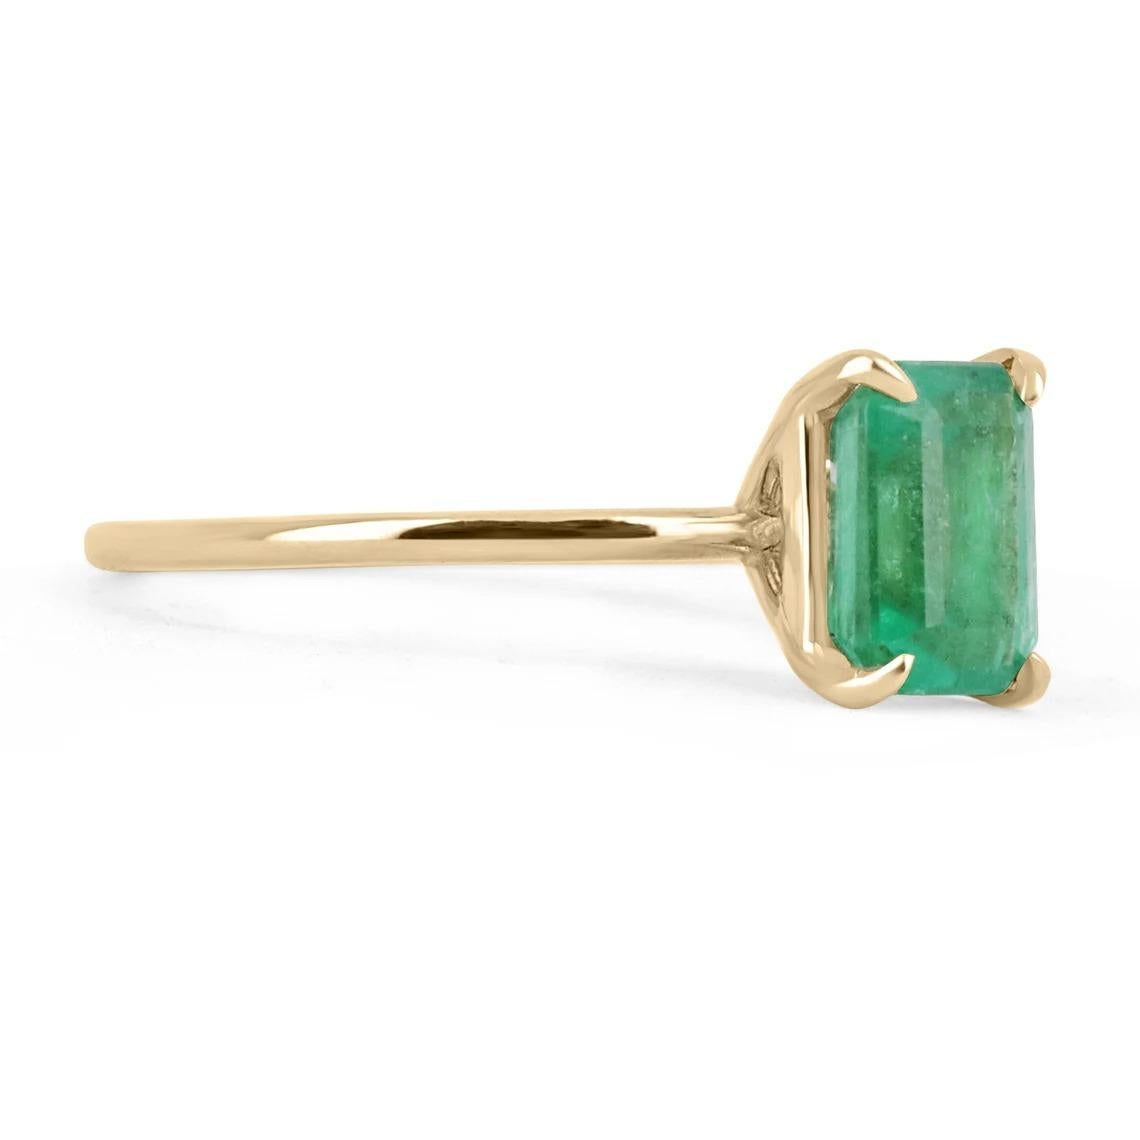 Displayed is a custom emerald solitaire emerald-cut ring in 14K yellow gold. This gorgeous solitaire ring carries a 1.40-carat emerald in a four-prong setting. The emerald has very good clarity with minor flaws that are normal in all genuine